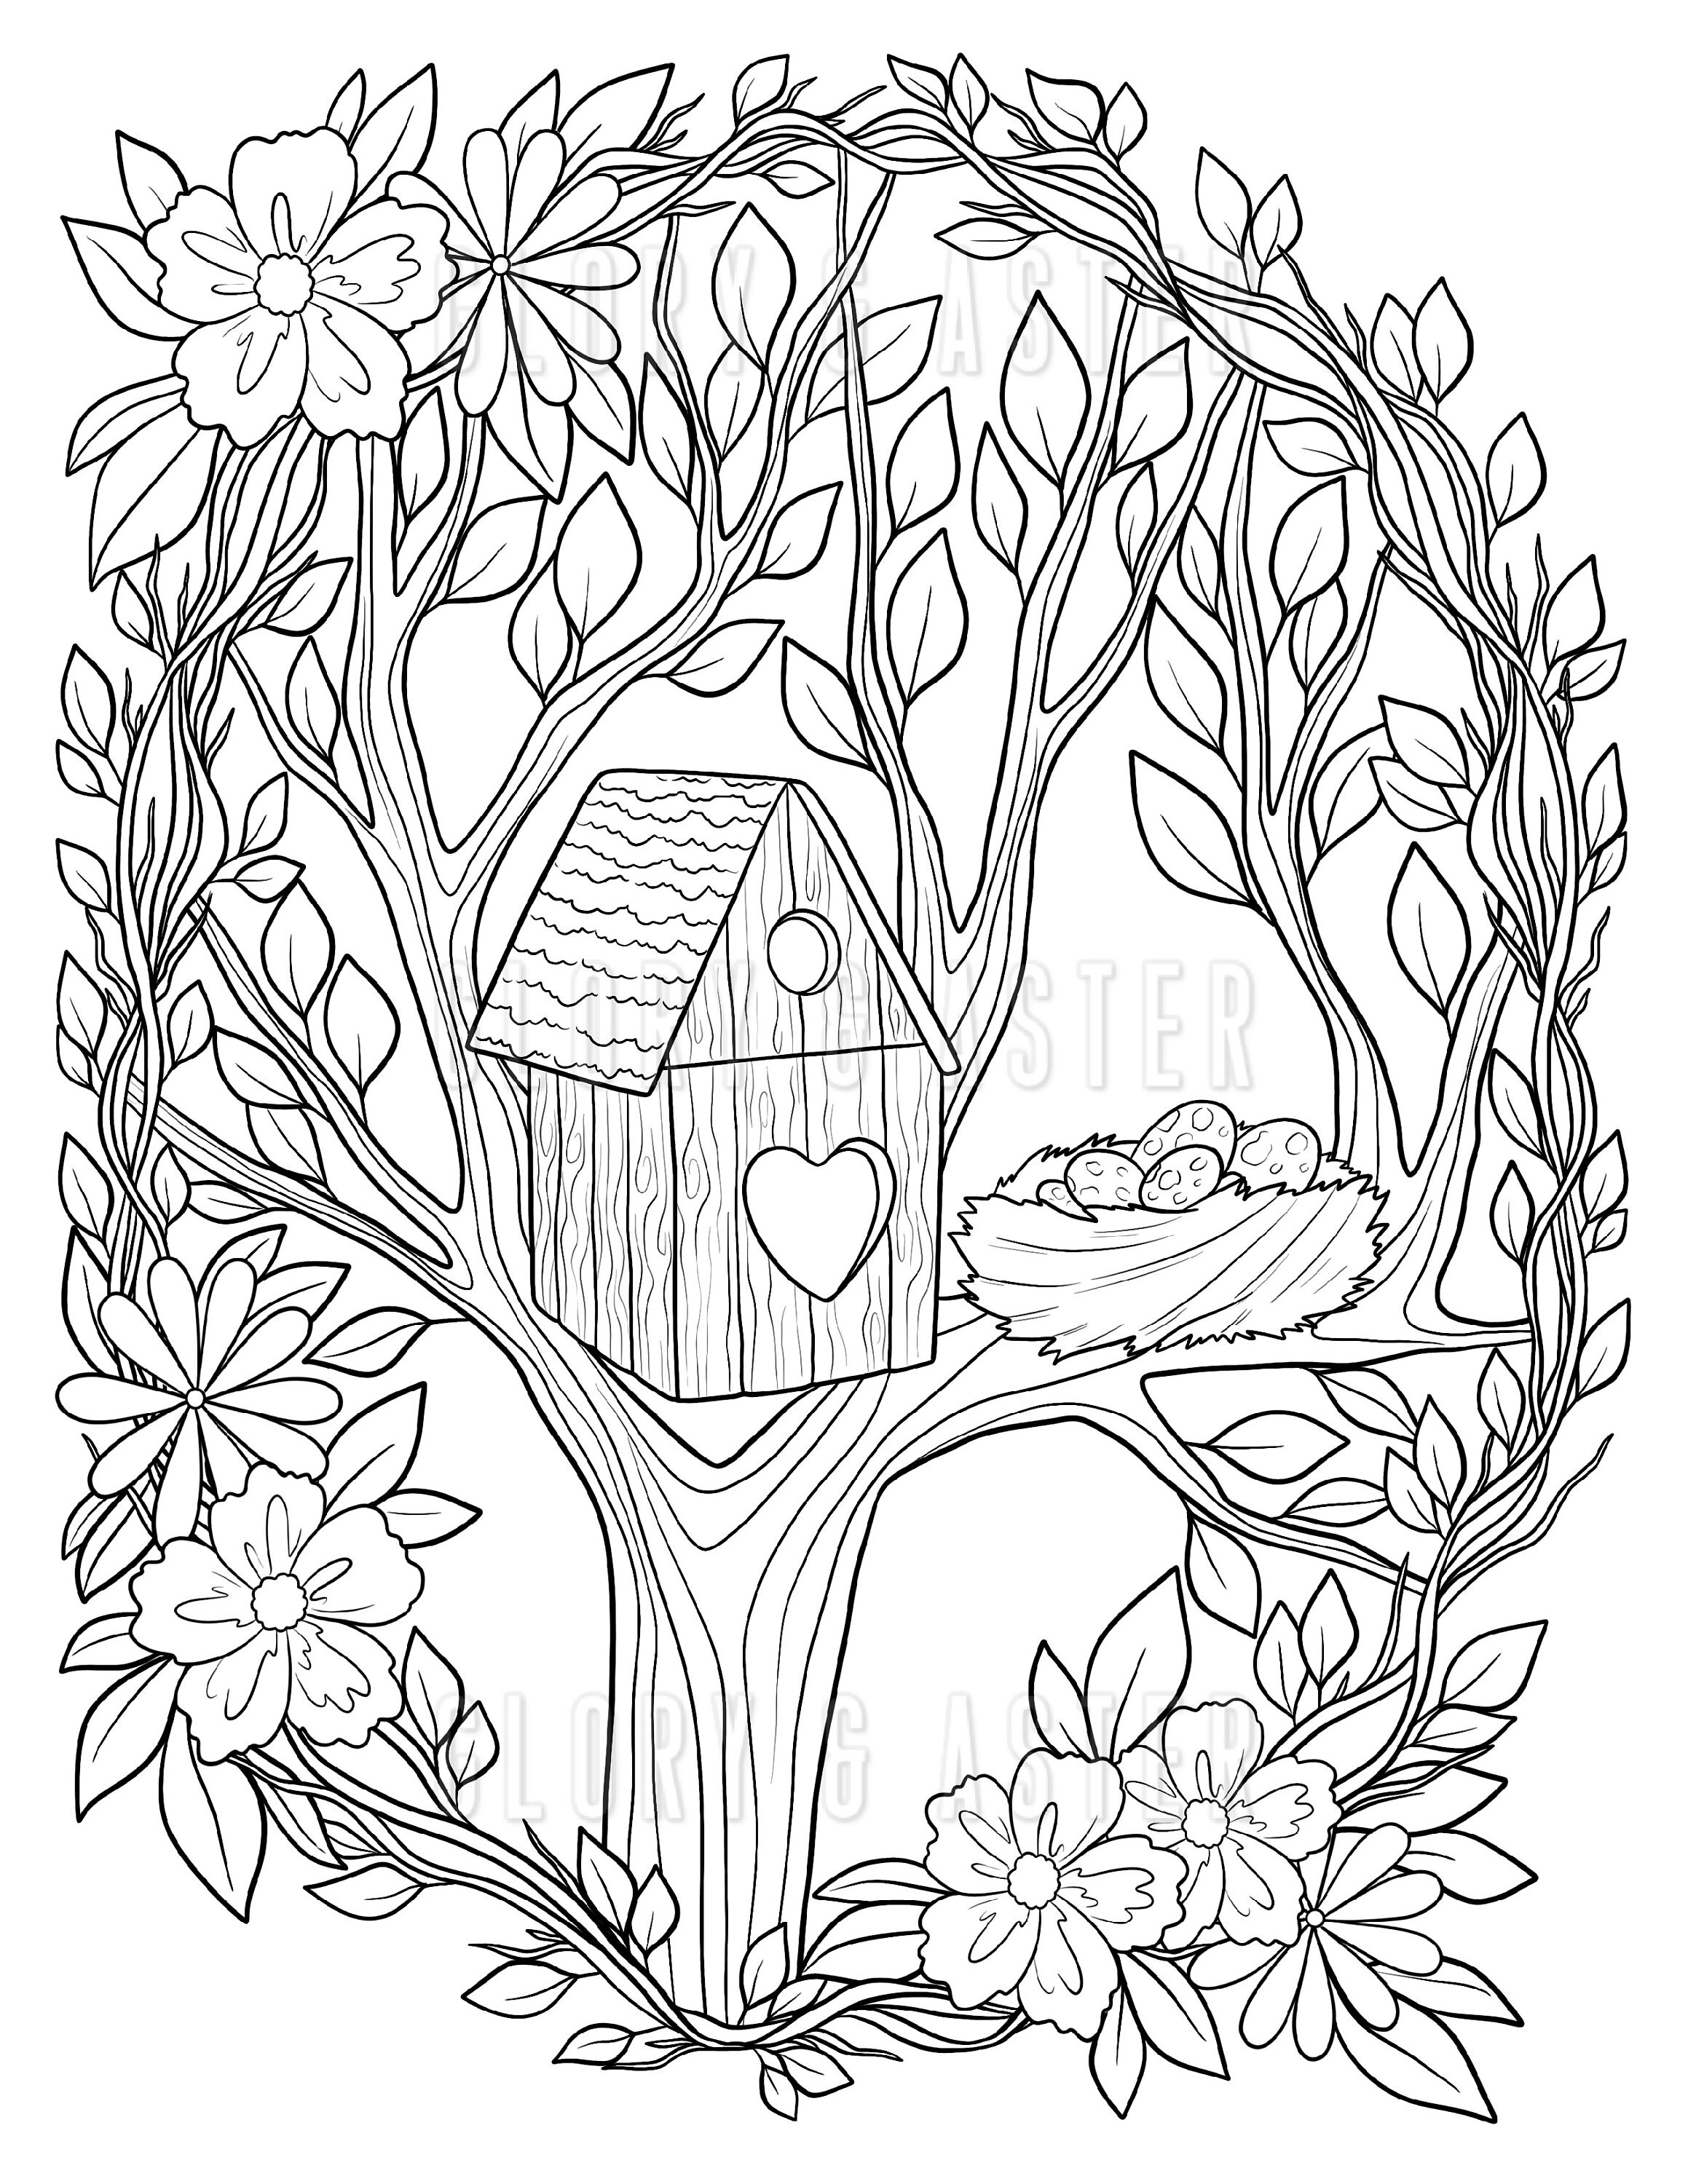 Simple Satisfying Large Print Coloring Book: Birds In The Trees 2 by  Coloringship Studio